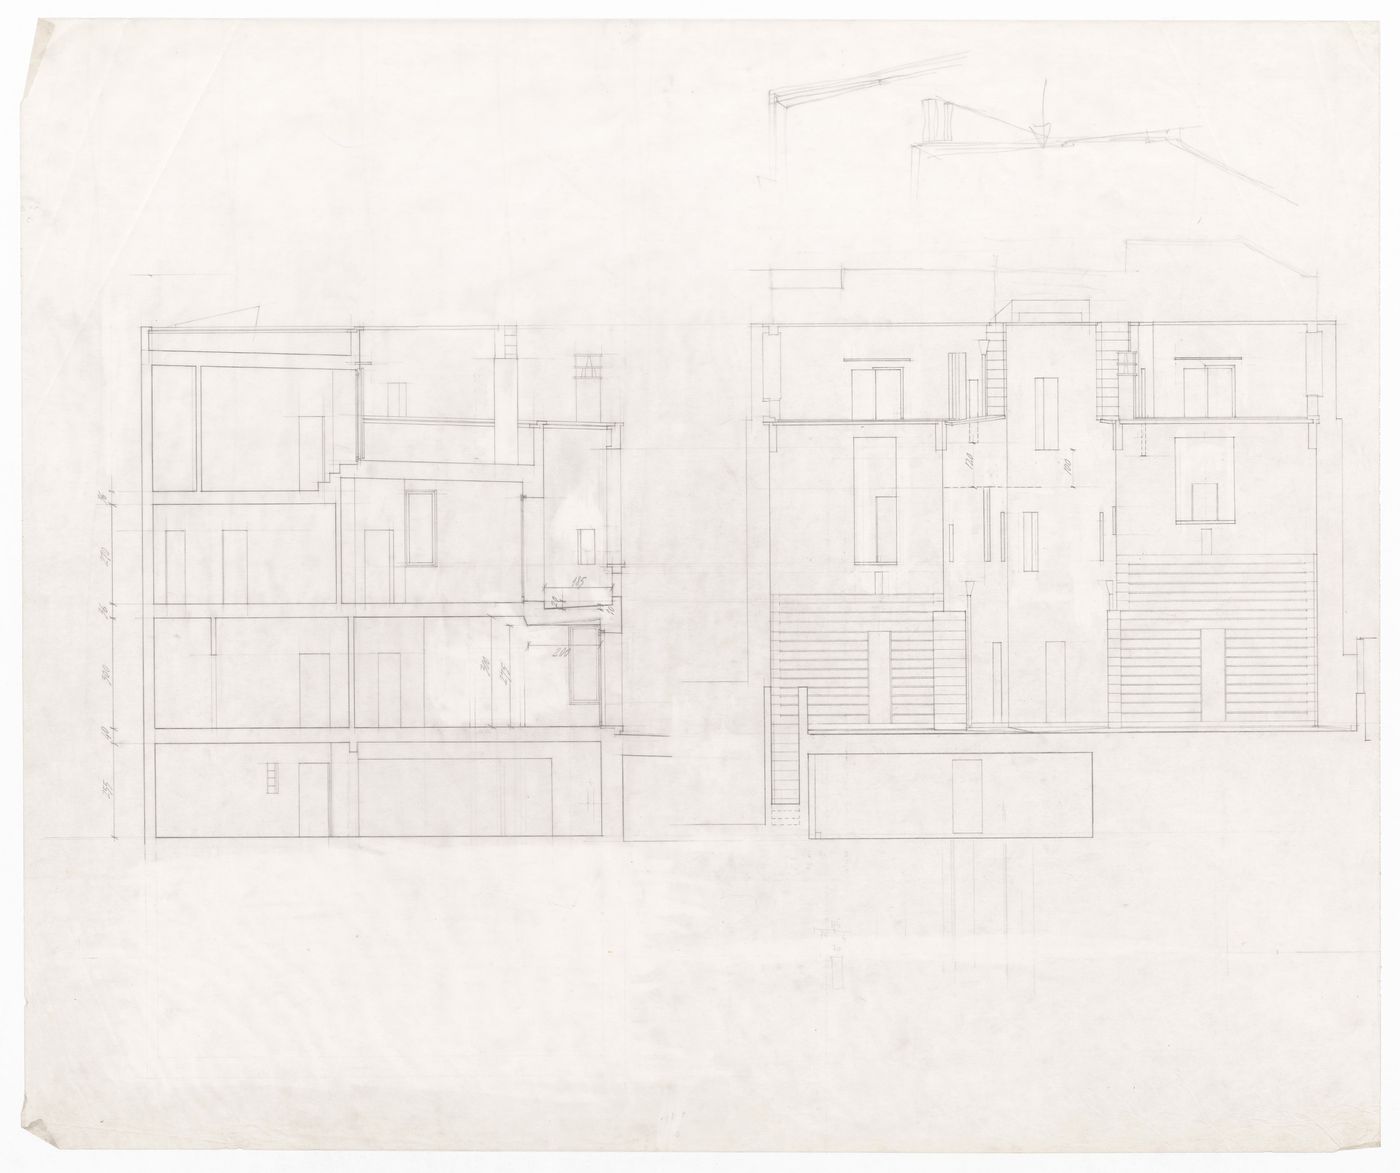 Sections and exterior elevation for Casa Miggiano, Otranto, Italy